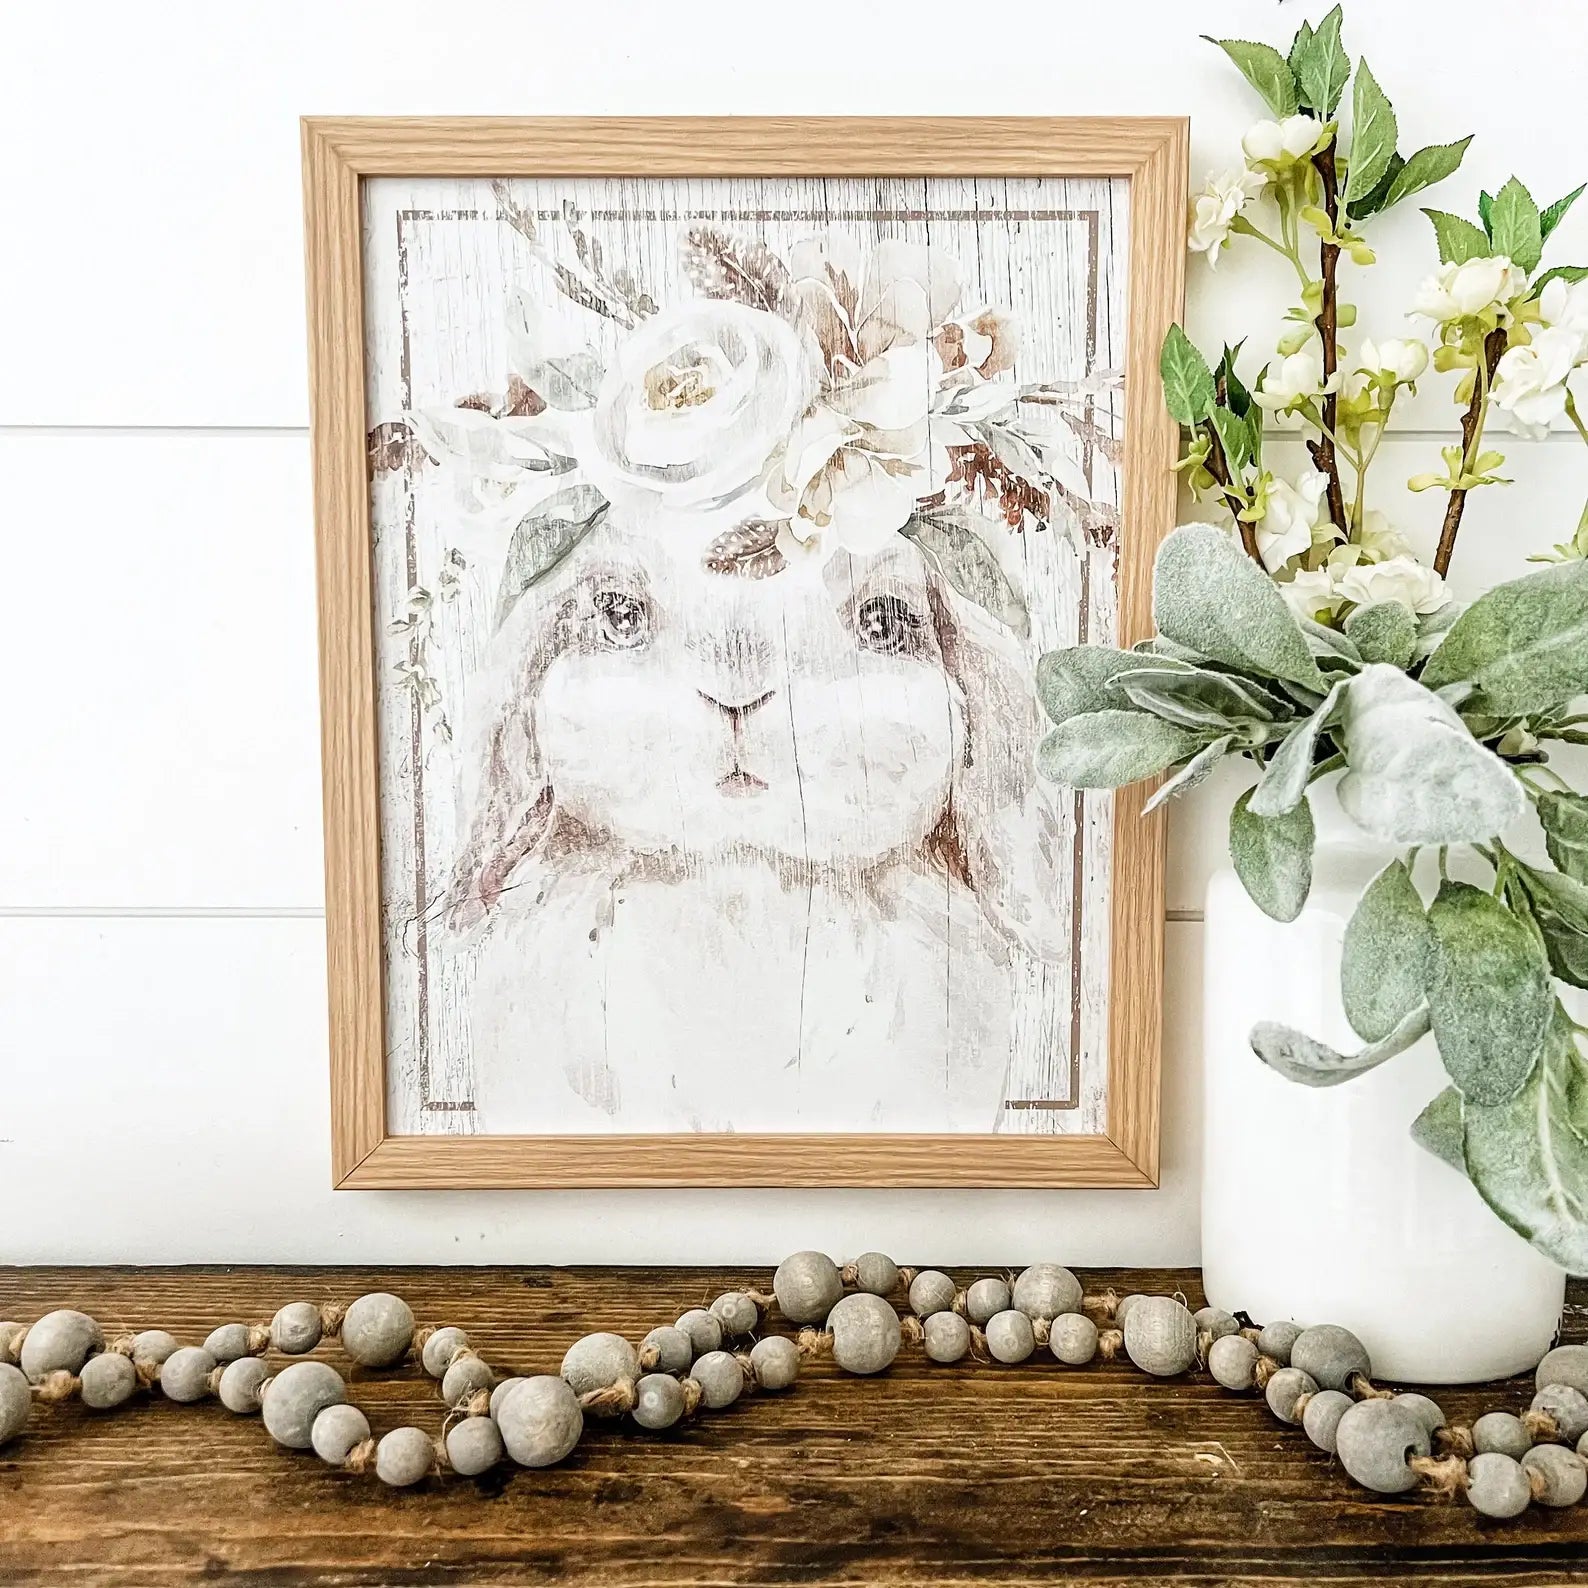 WillowBee Signs & Designs - Bunny with Flower Crown Spring Sign